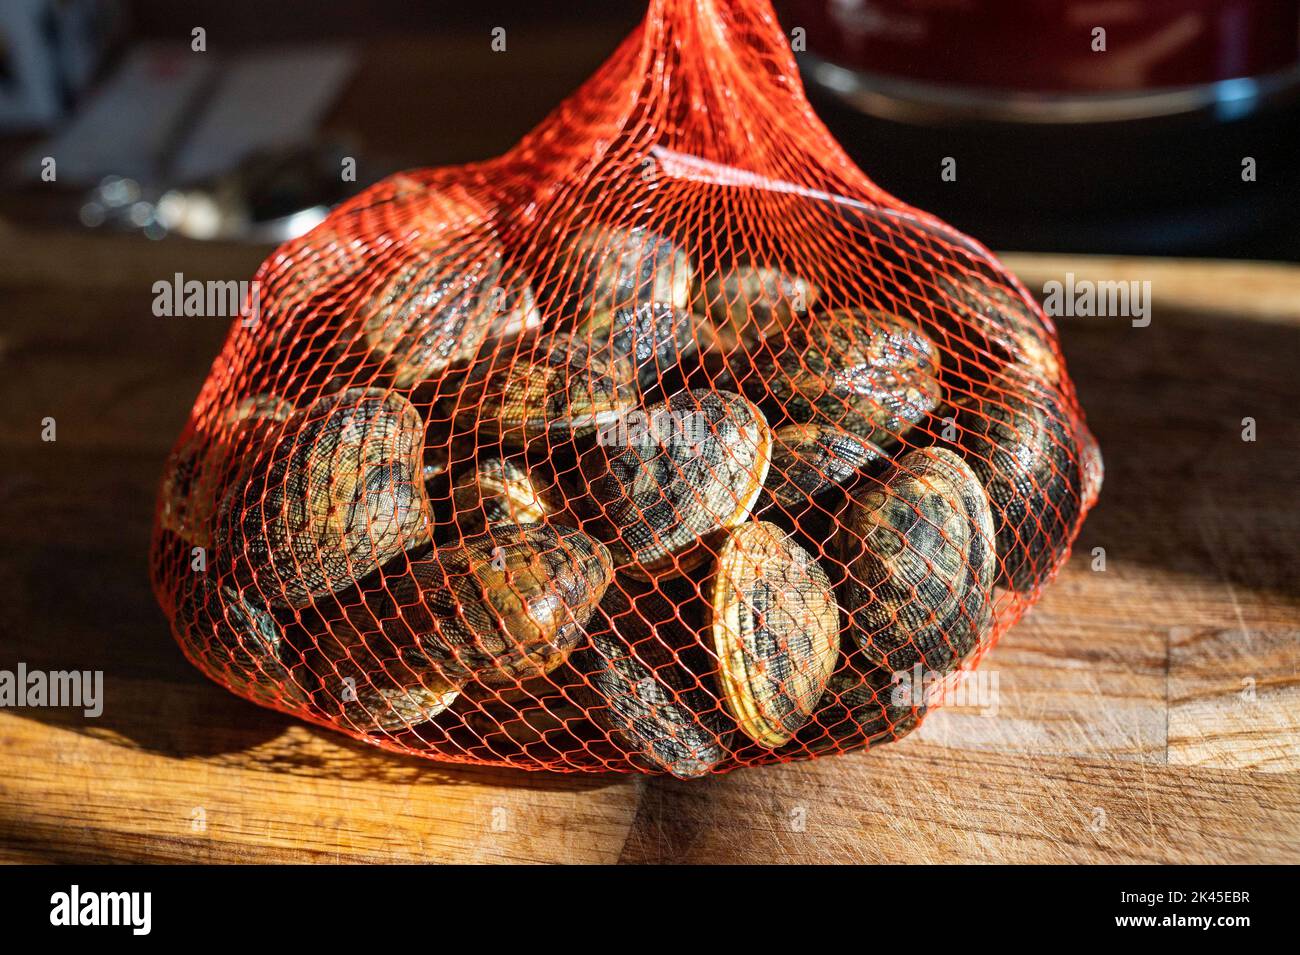 Bag of of fresh live clams ready for cooking  Photograph taken by Simon Dack Stock Photo